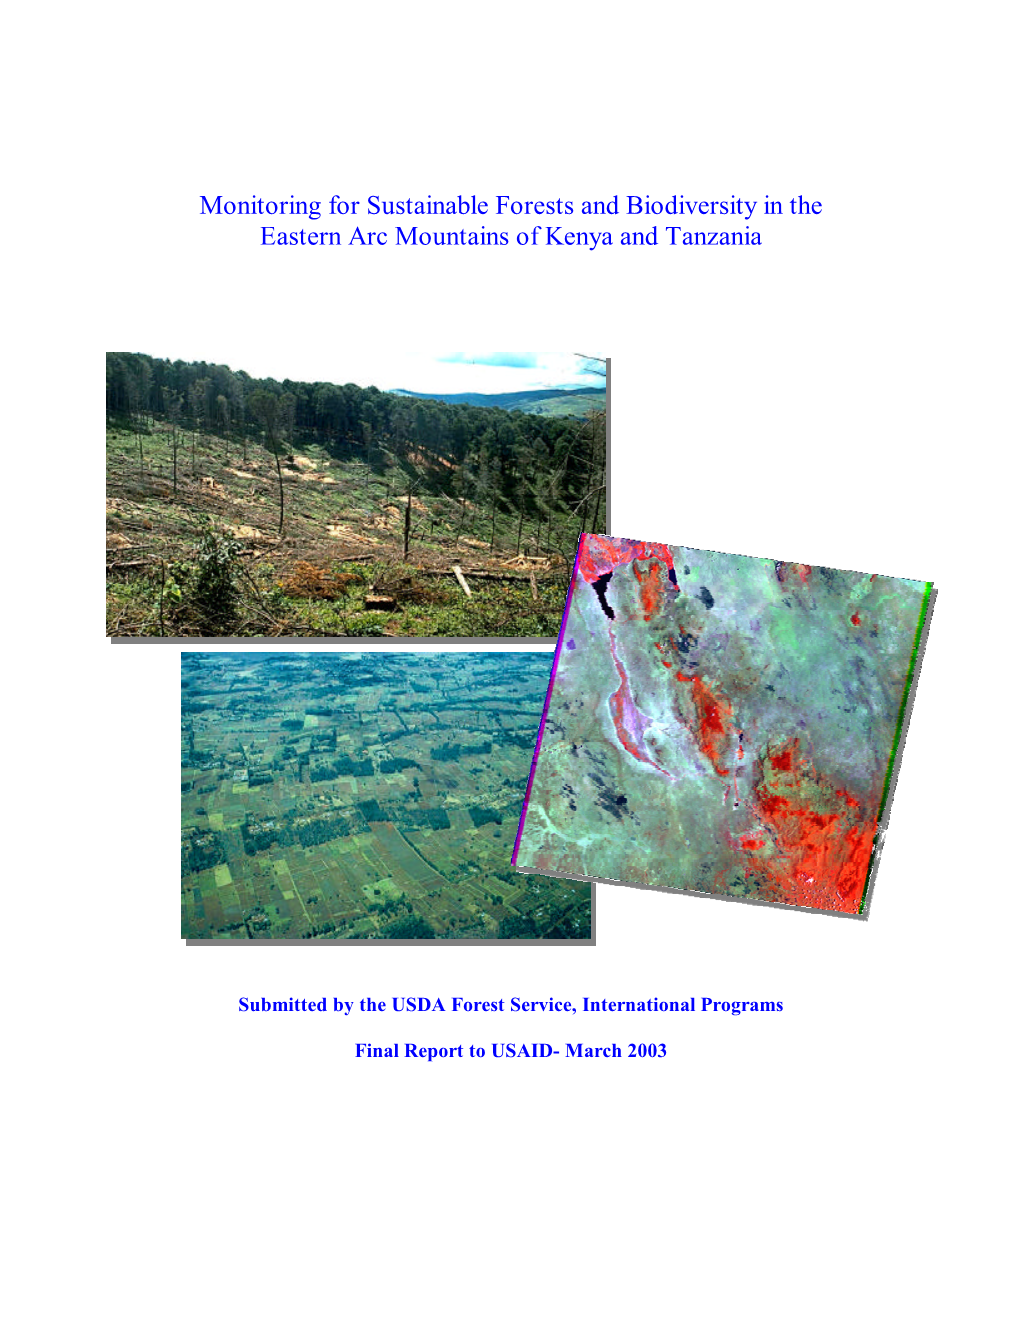 Monitoring for Sustainable Forests and Biodiversity in the Eastern Arc Mountains of Kenya and Tanzania